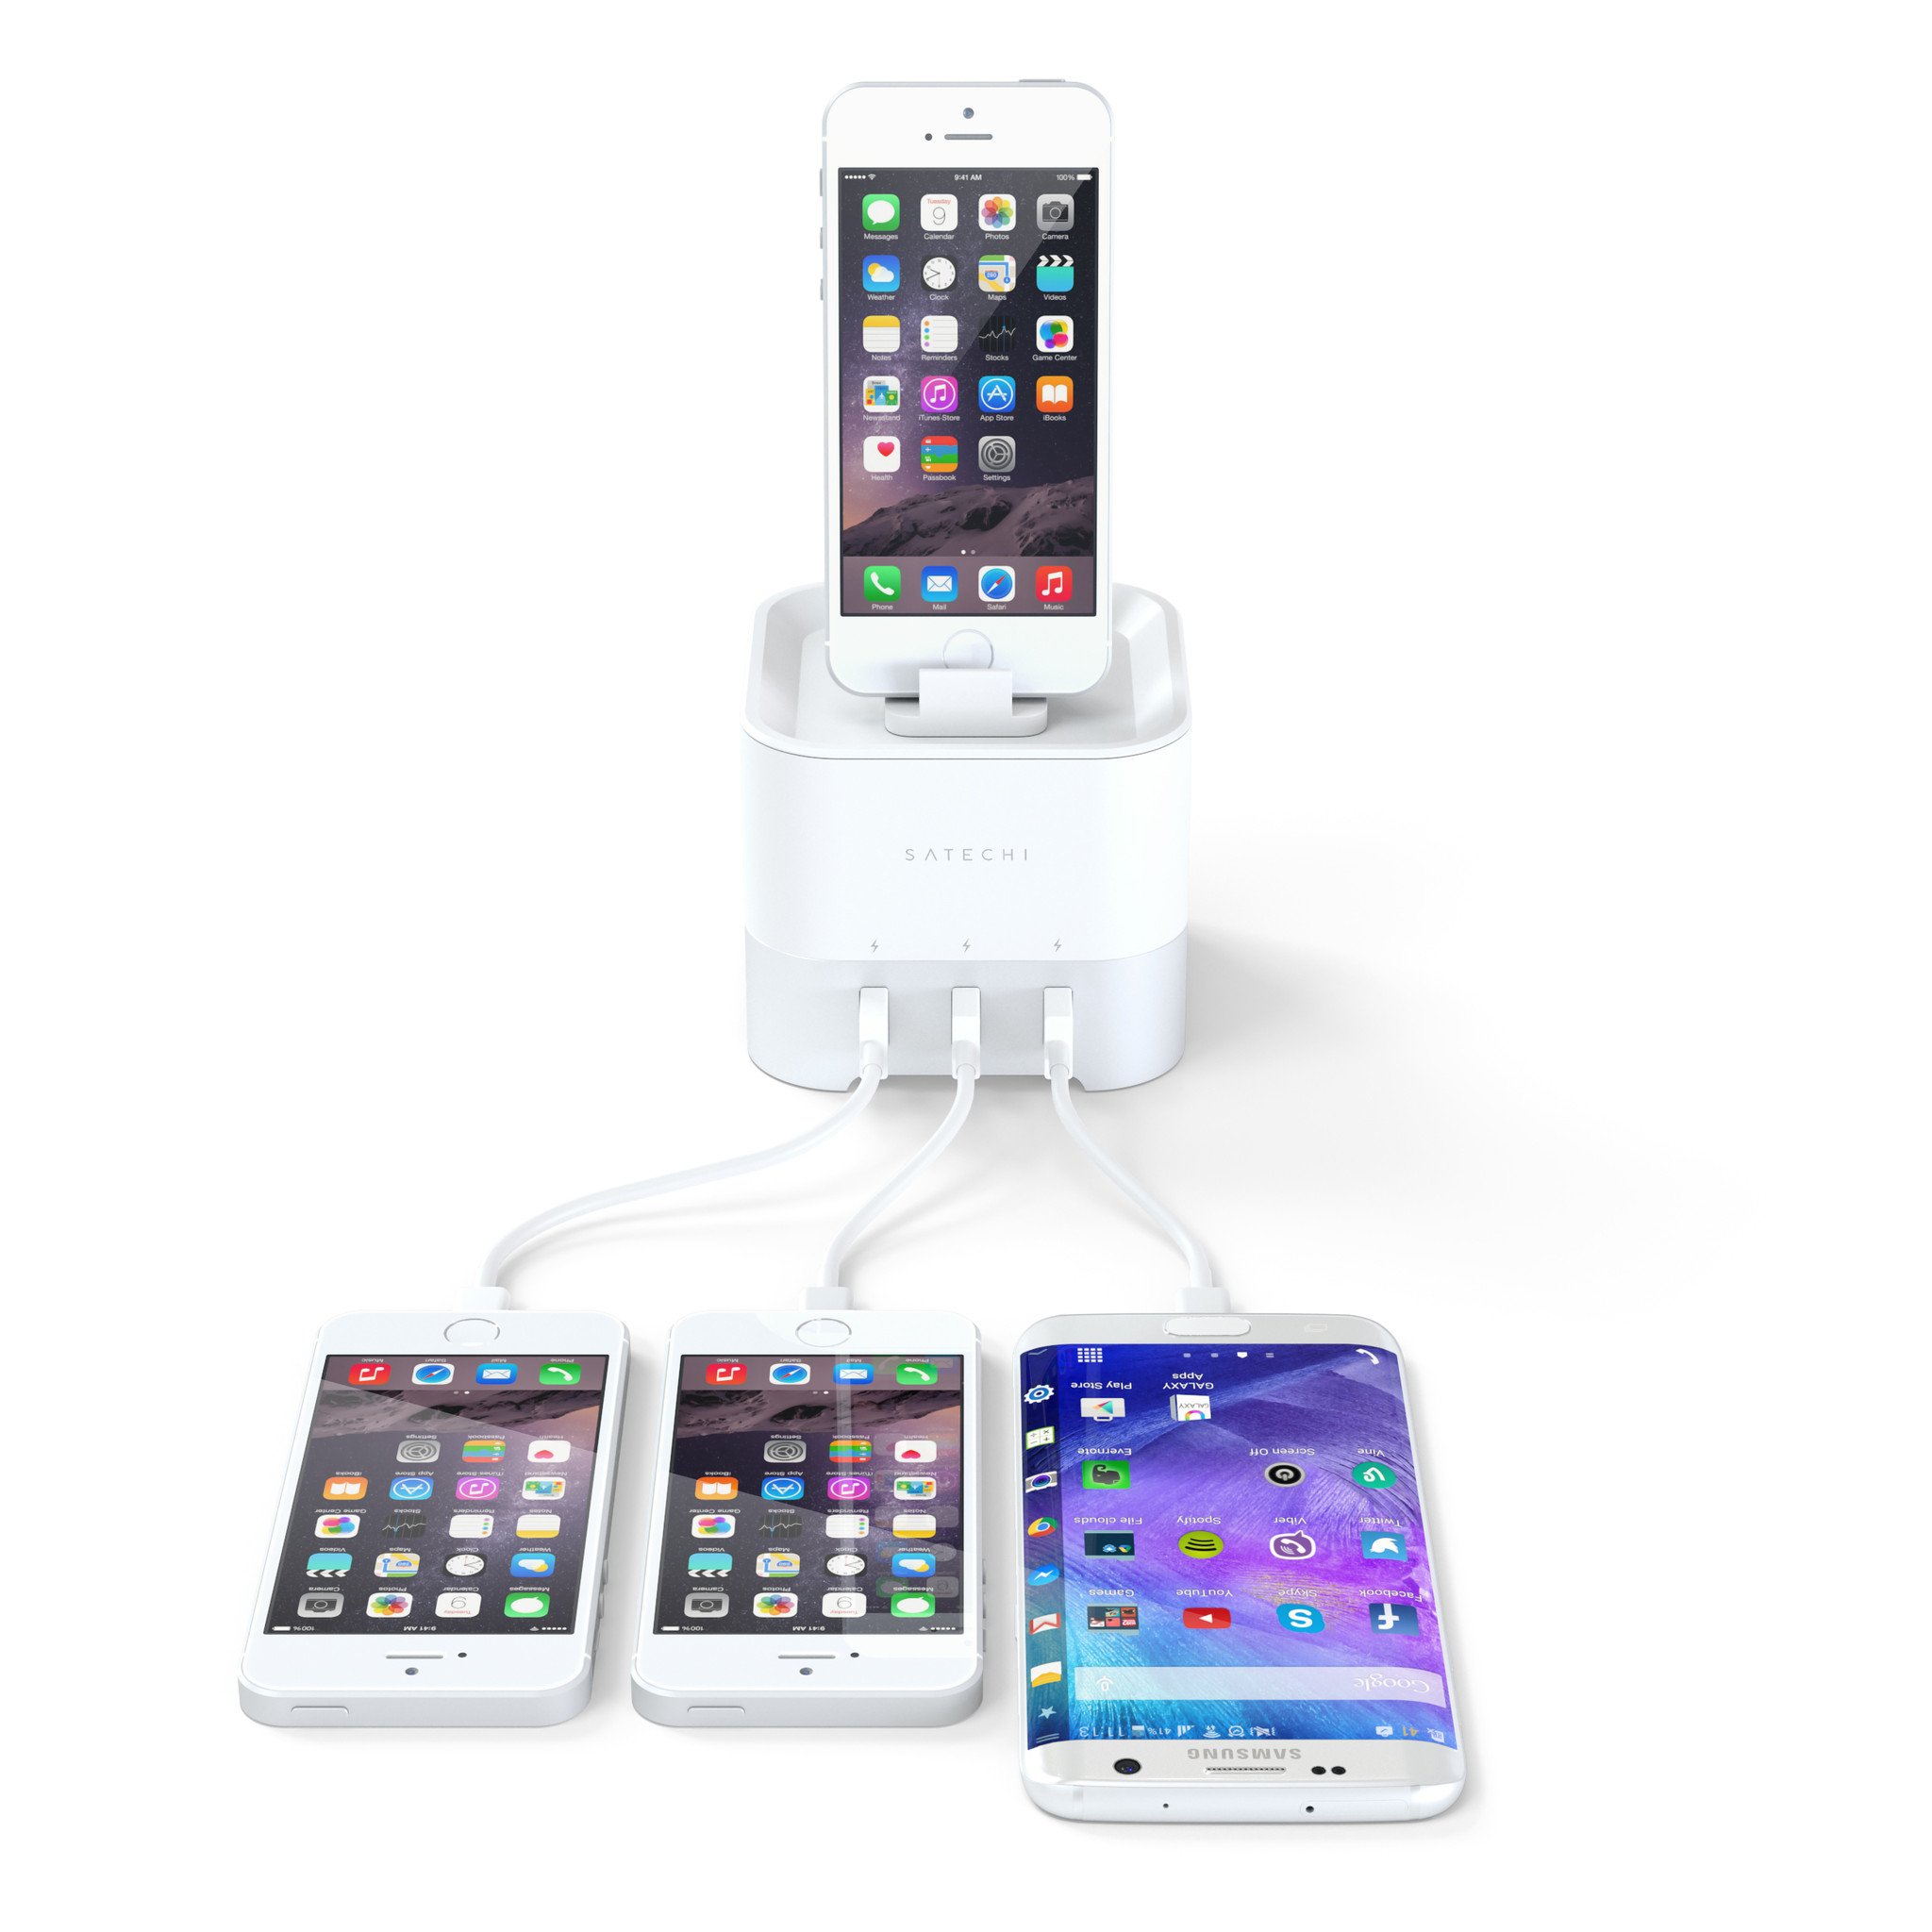 Satechi Smart Charging Stand adapters